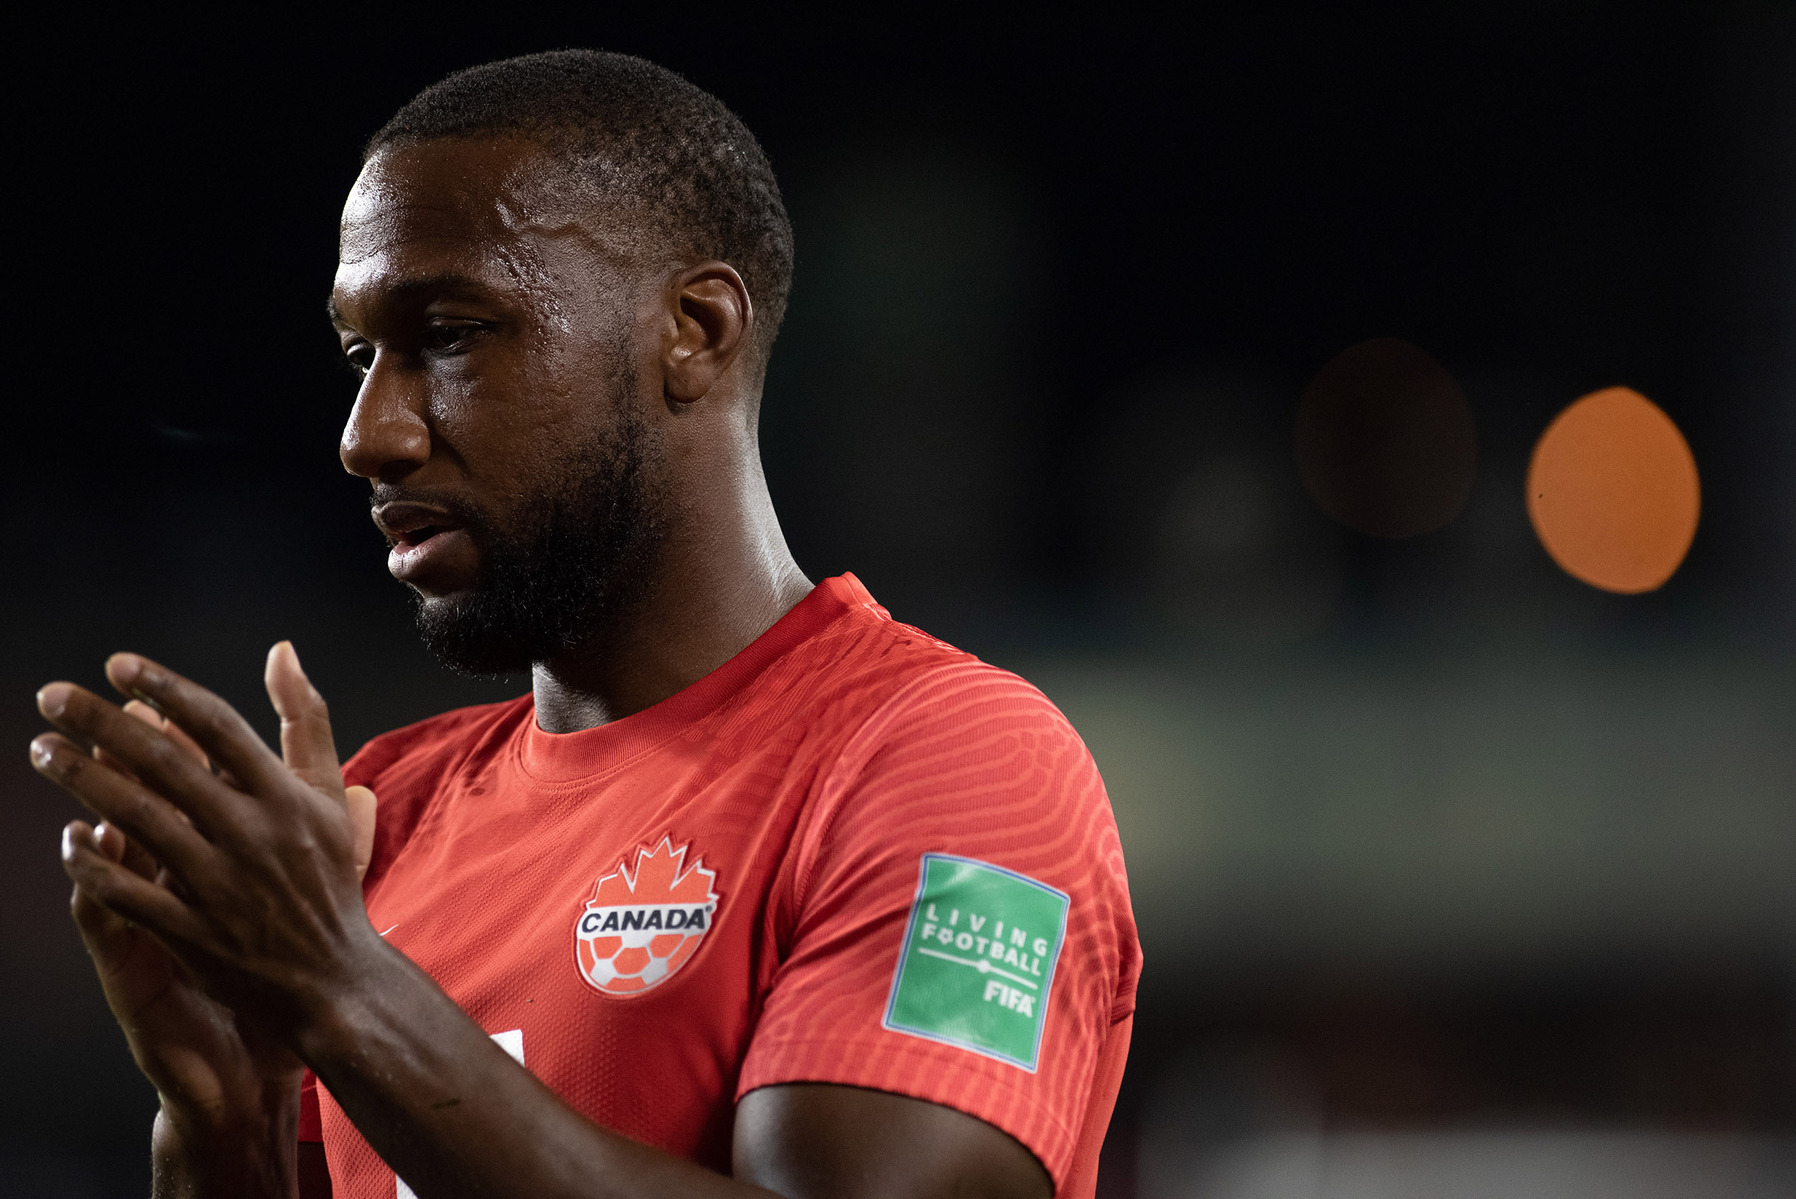 TORONTO, Ont. (08/09/21) - Canada's Junior Hoilett is photographed during a 3-0 victory against El Salvador at BMO Field in Toronto on Sept. 8, 2021. Photo by Alex Lupul